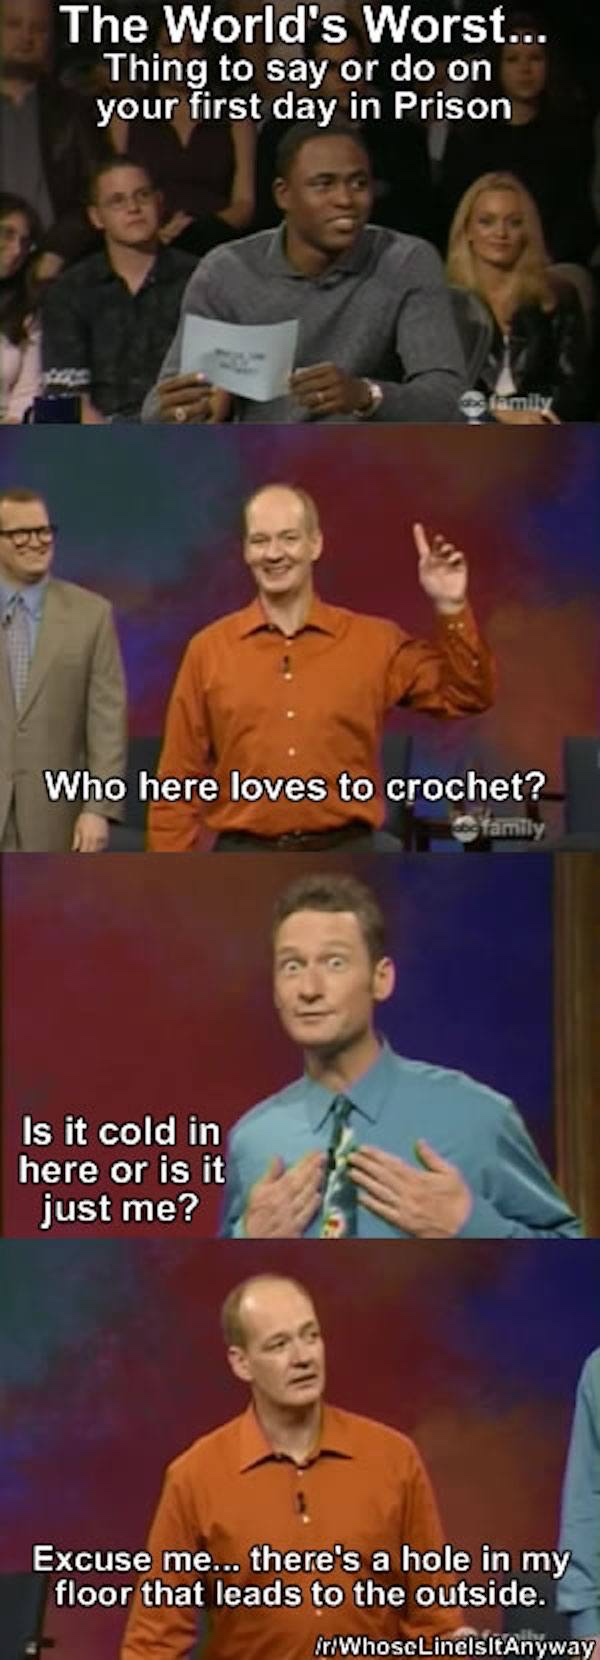 best of whose line is it anyway - The World's Worst... Thing to say or do on your first day in Prison family Who here loves to crochet? family Is it cold in here or is it just me? Excuse me... there's a hole in my floor that leads to the outside. irWhoscL